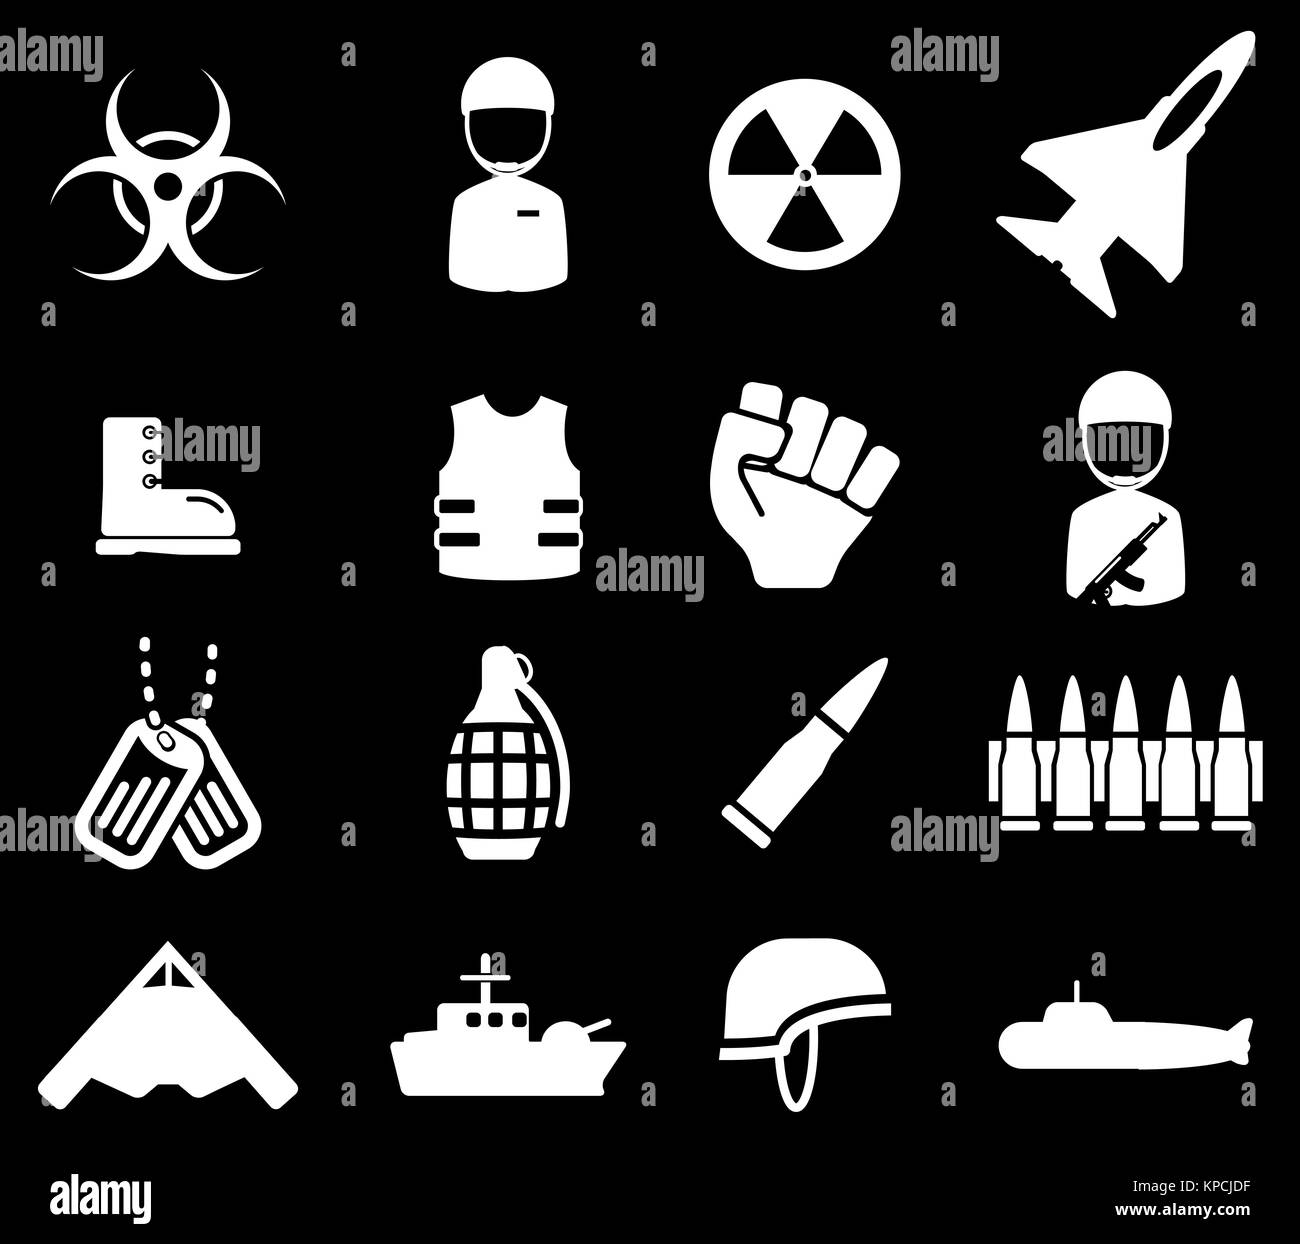 Military simply icons Stock Photo